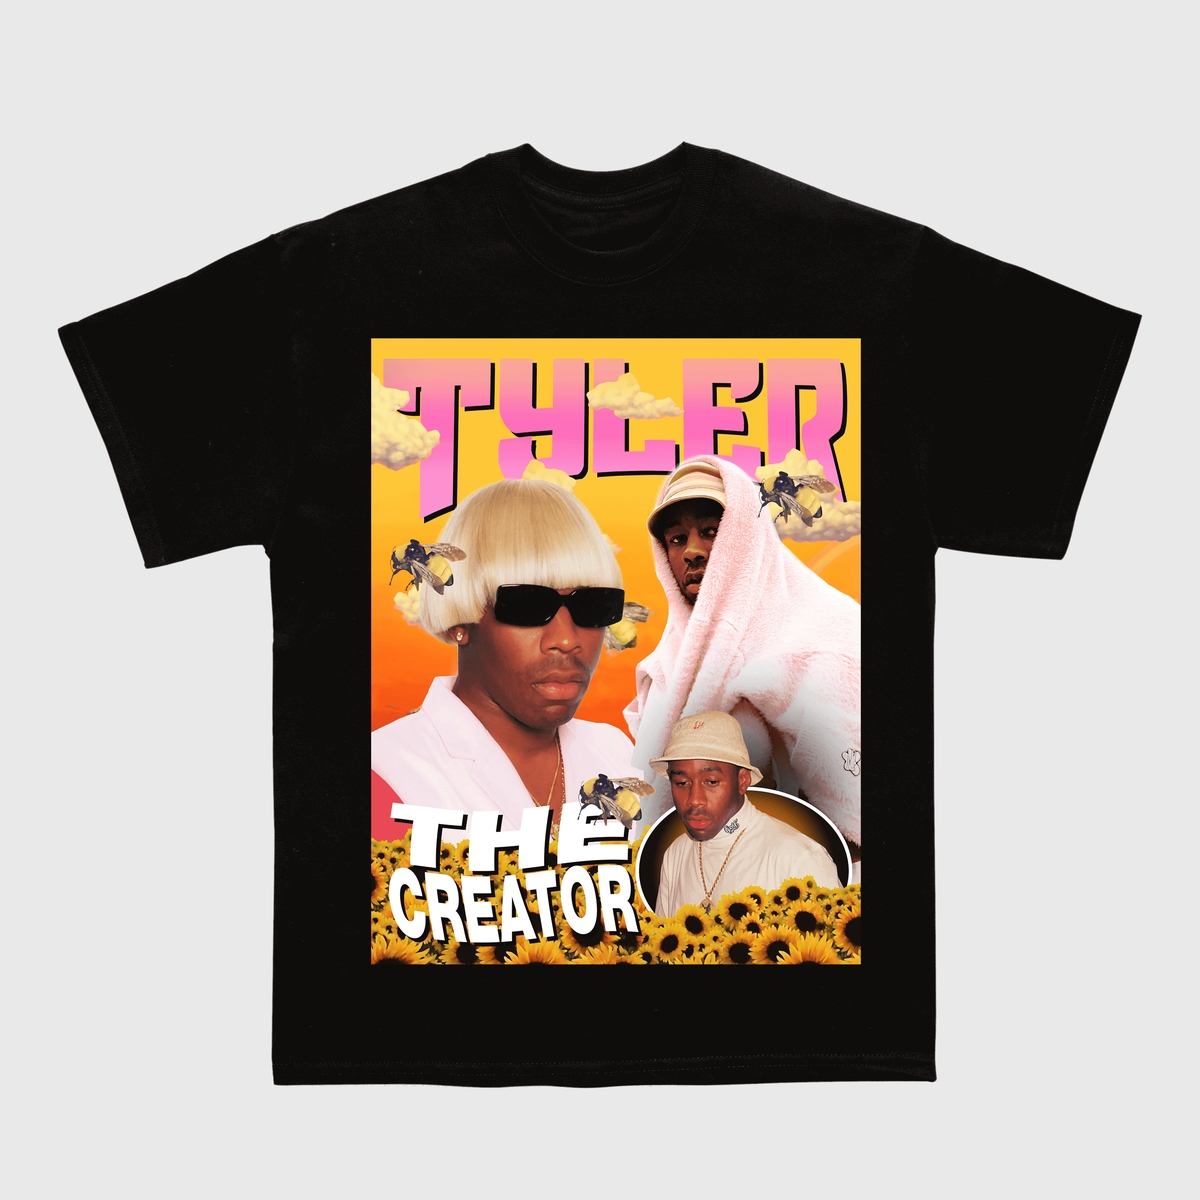 Tyler the creator Scarfundefined by Tshirtculture